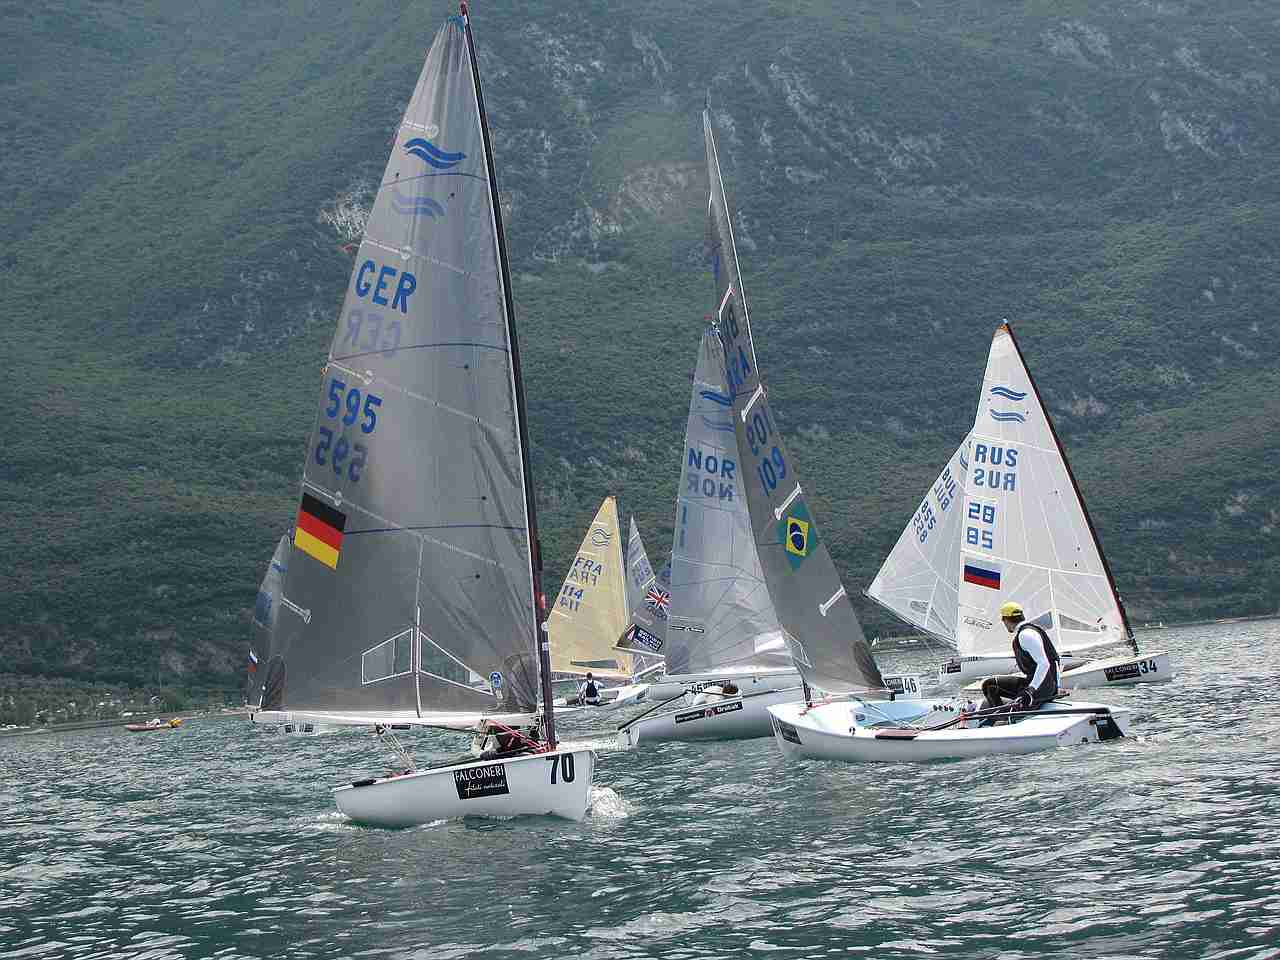 Finn Silver Cup opened at Malcesine